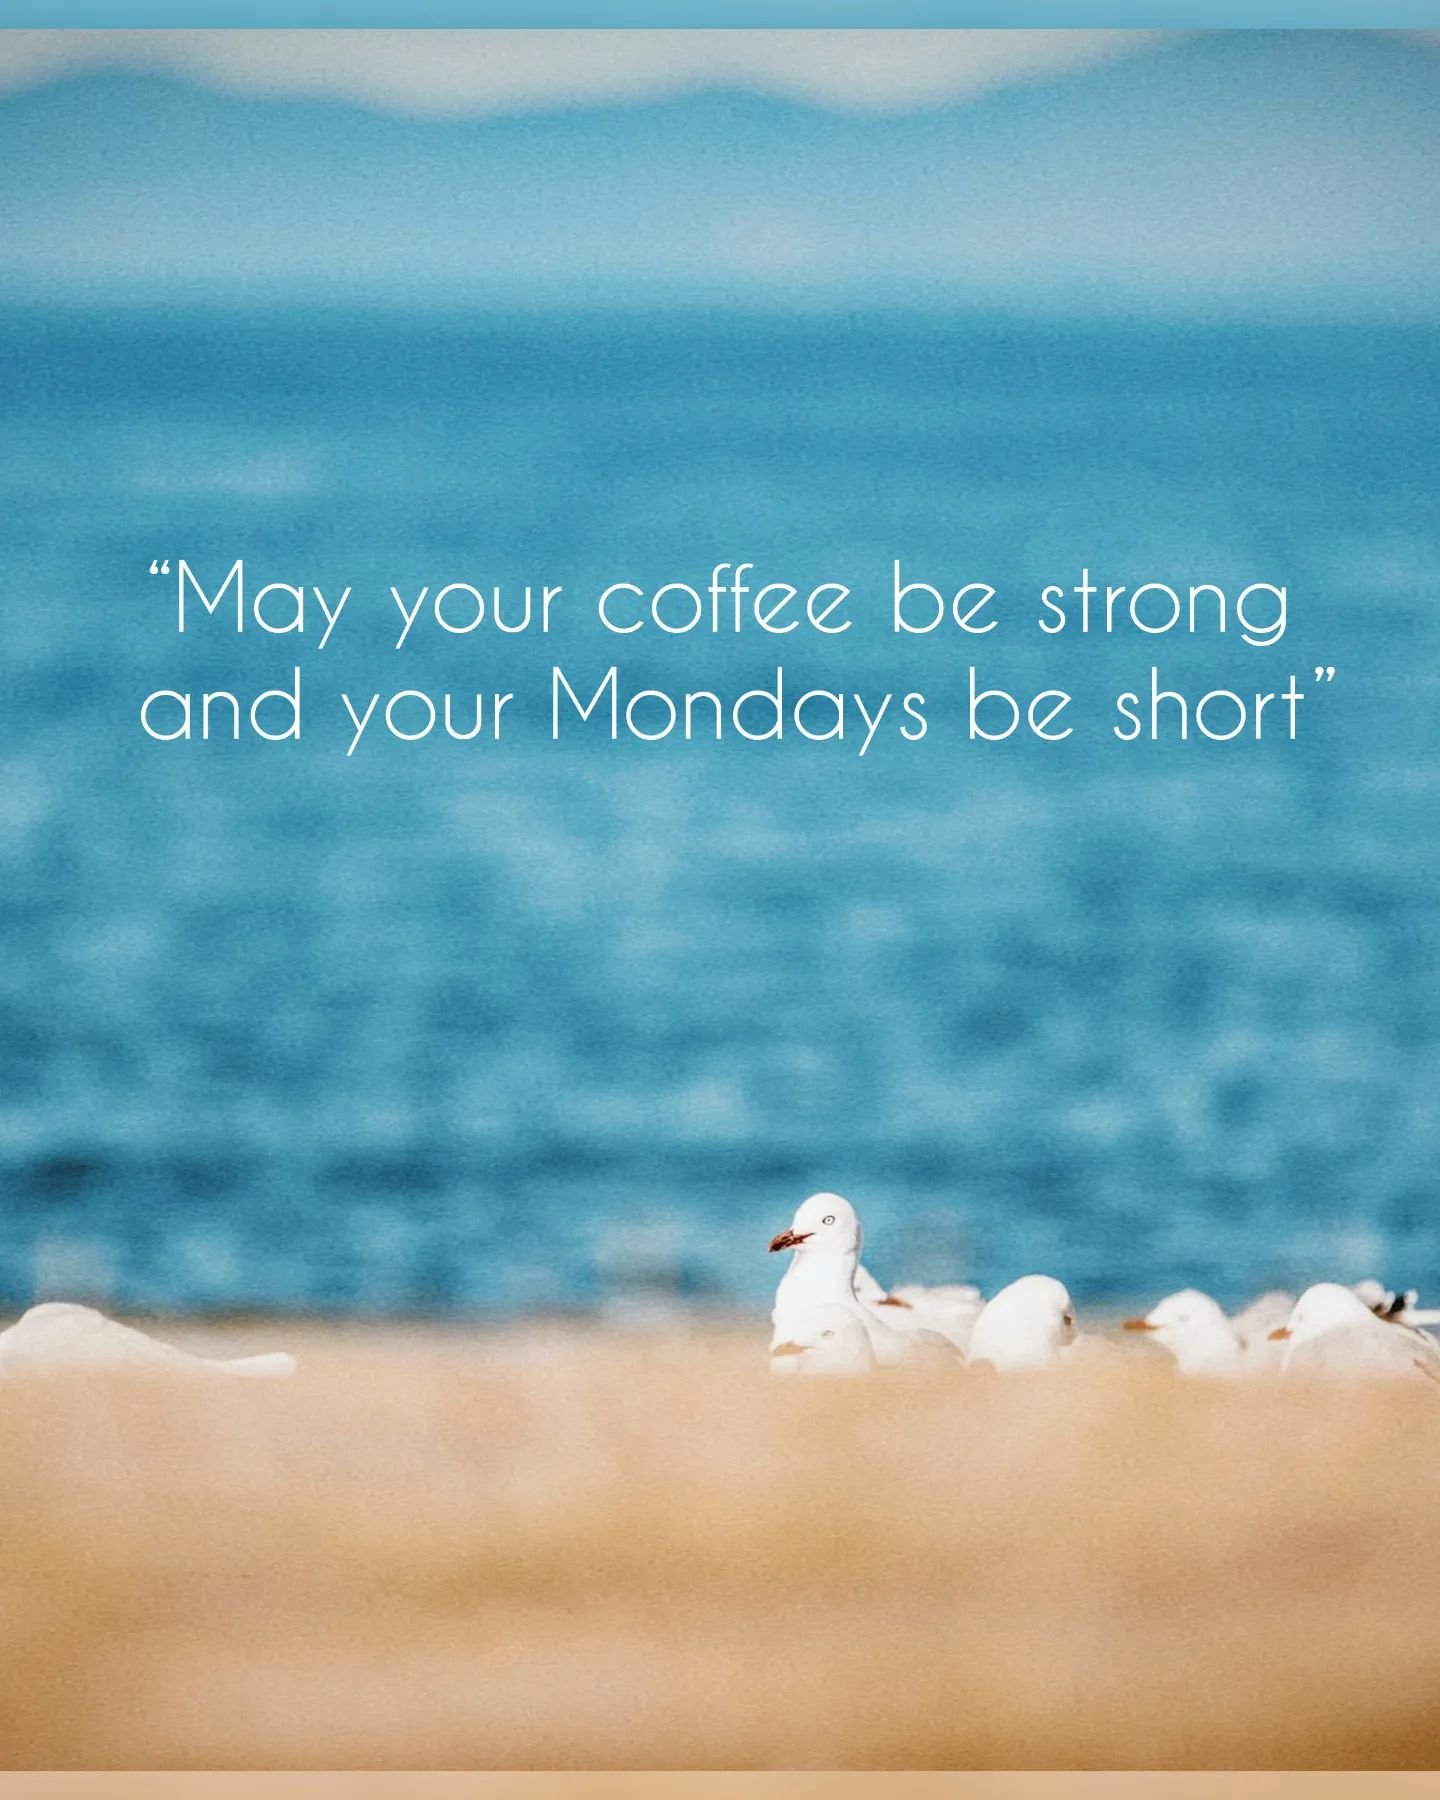 May your coffee be strong and your Mondays be short ⏰.

Here's to a beautifull  and positive week ahead! ✨

Need a productivity boost to design your website? Check out our template shop in this link: 💻https://www.mistwebsites.com/shop-templates  for